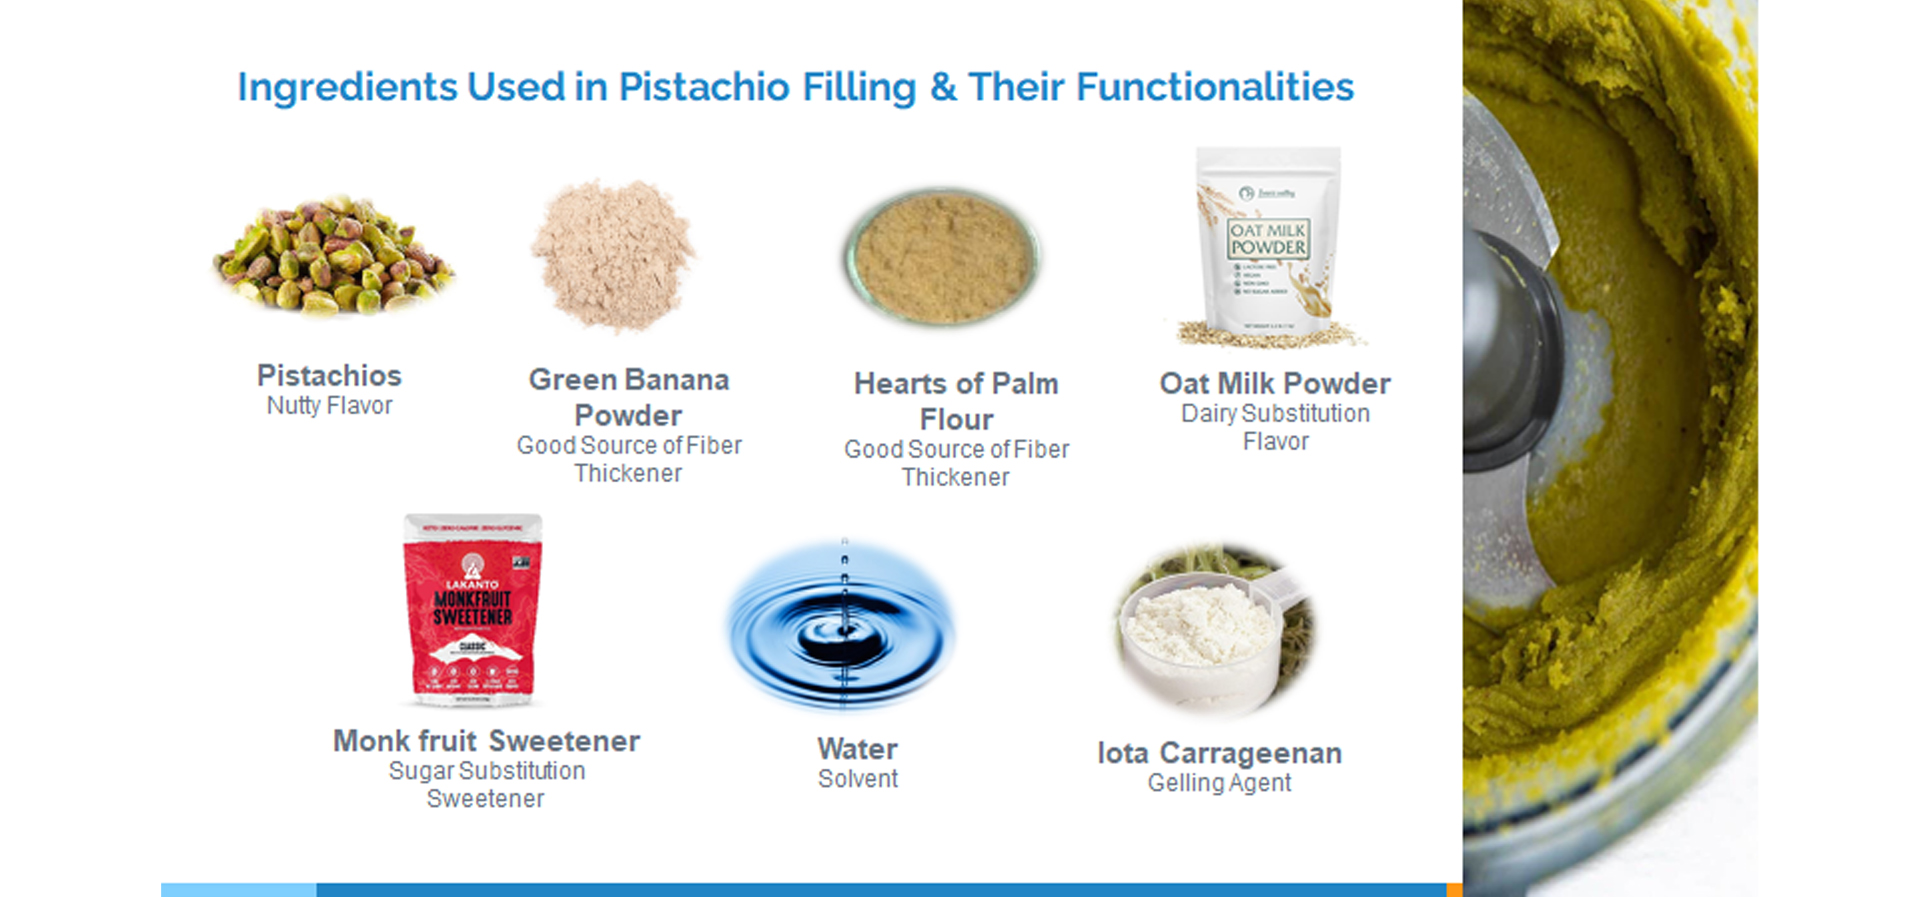 A PowerPoint slide of the pistachio filling ingredients